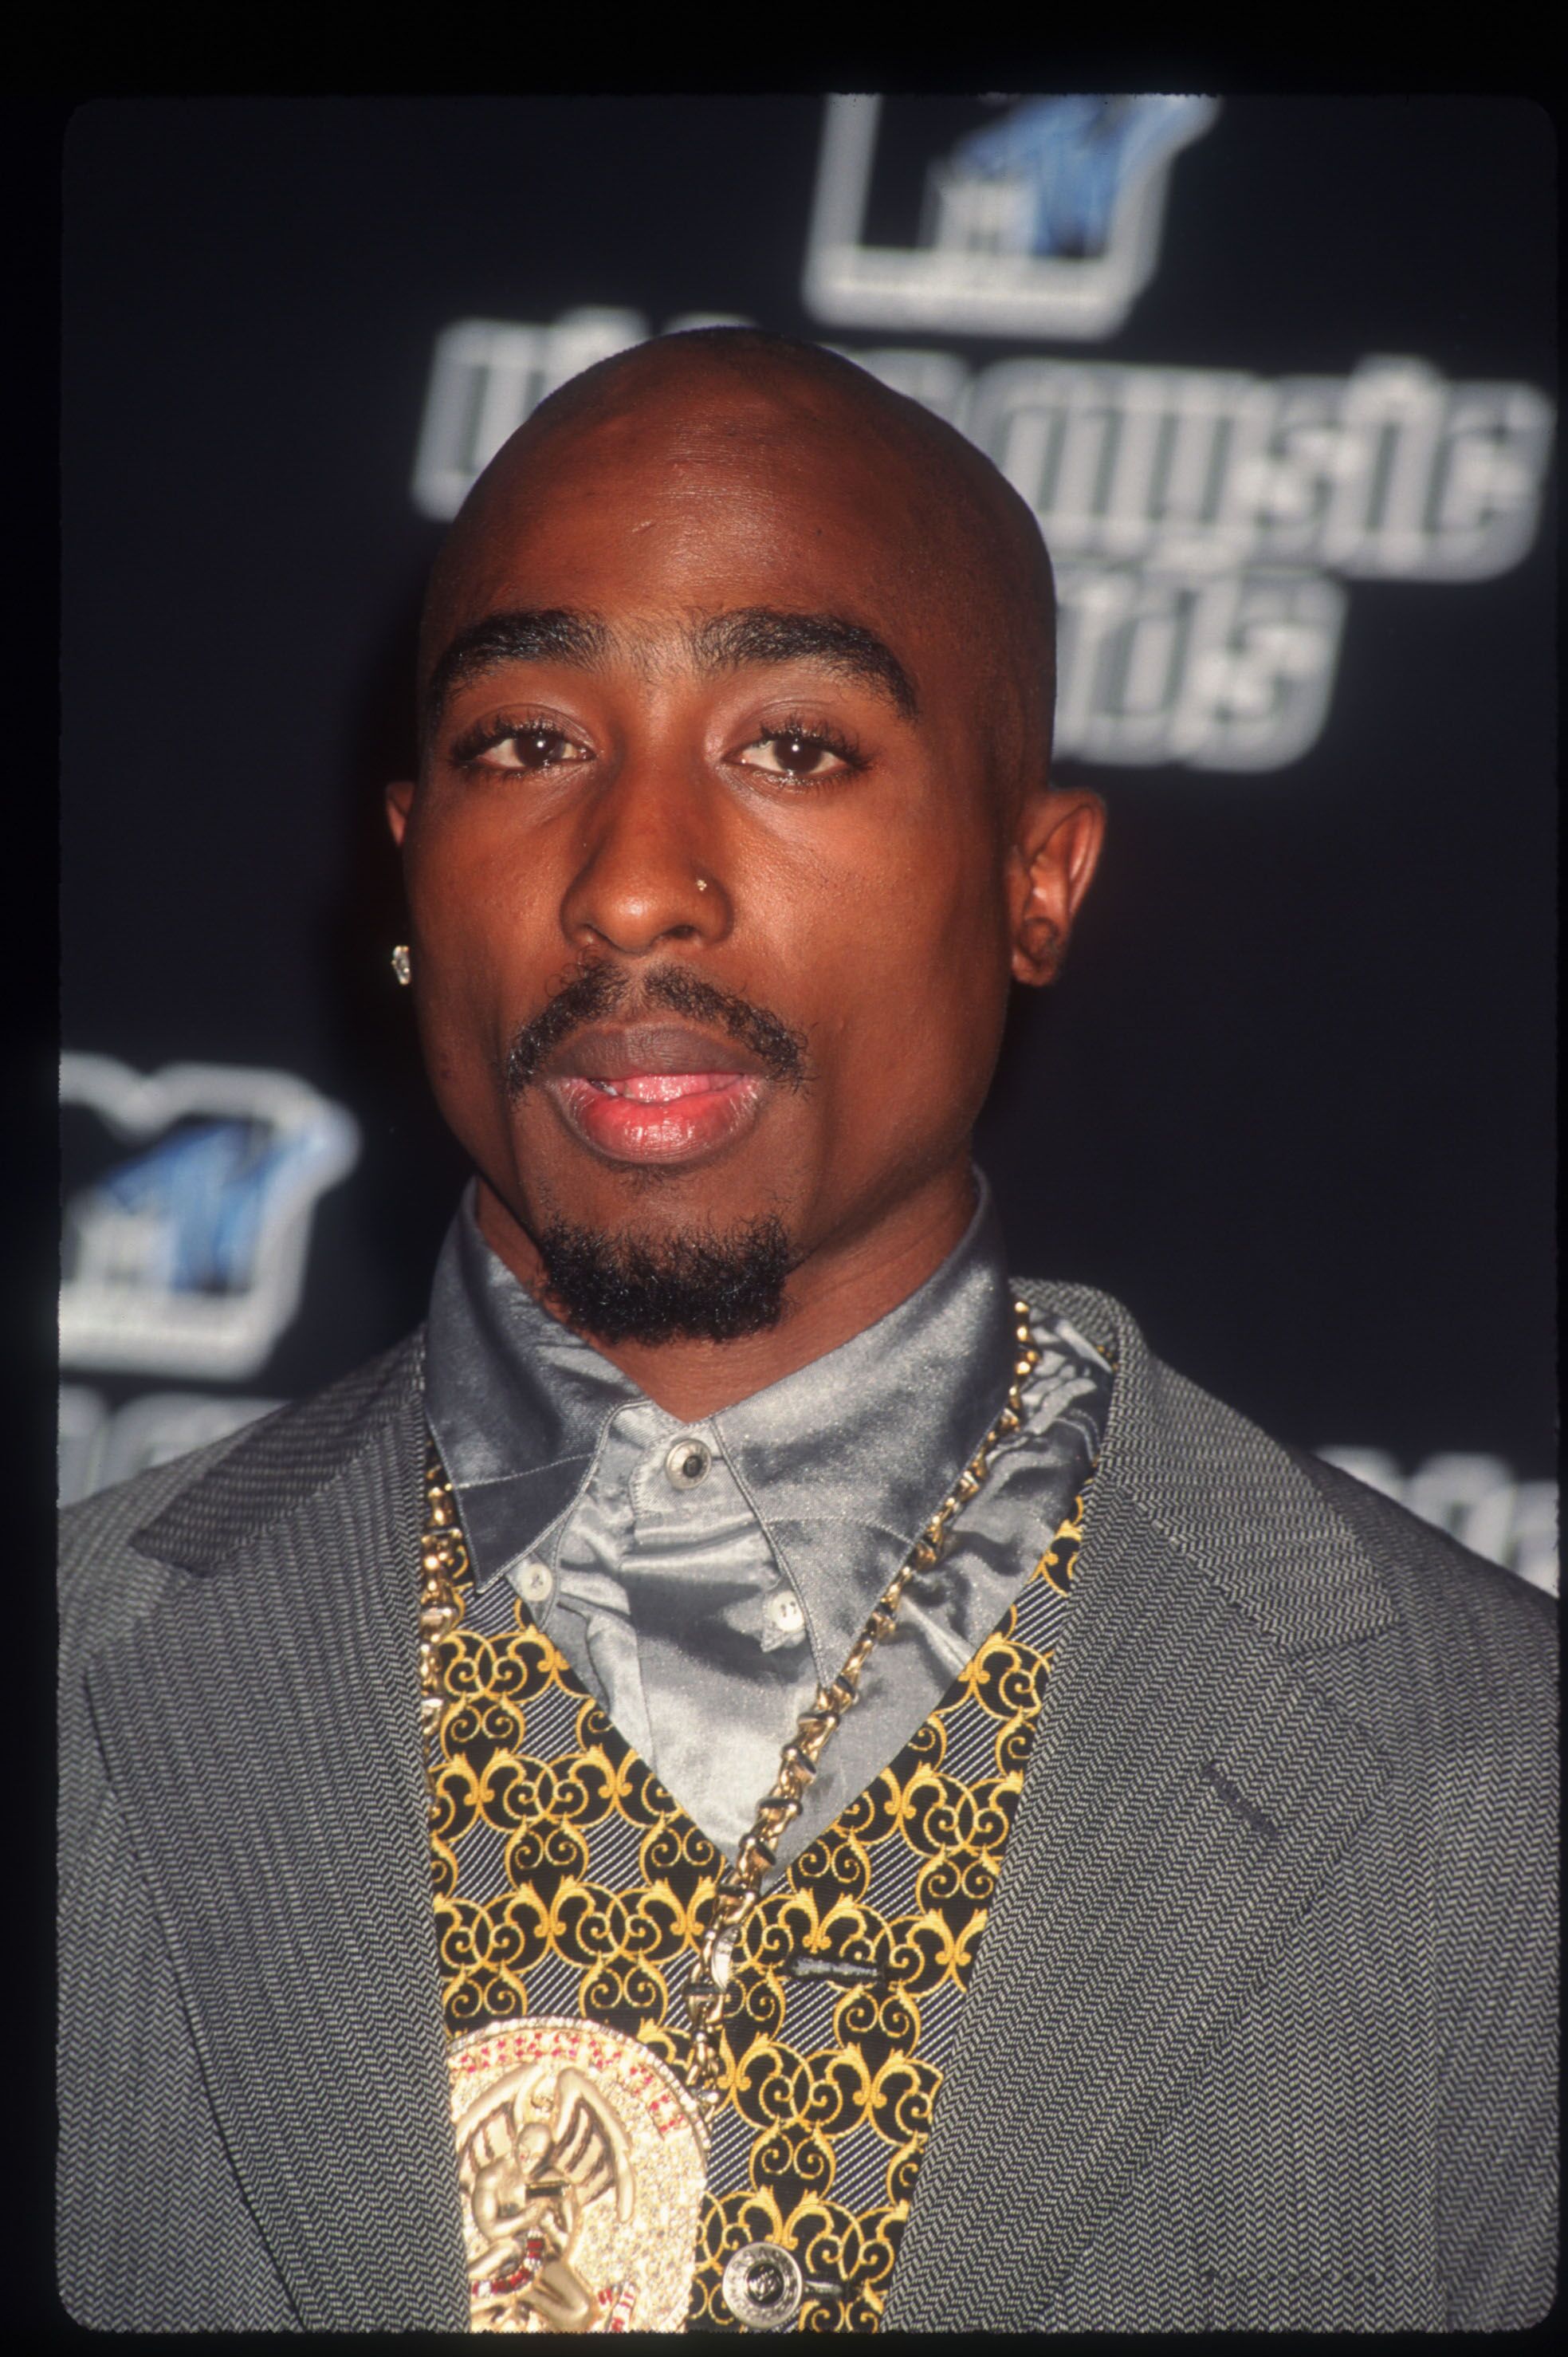 Tupac Shakur at the MTV Video Music Awards | Source: Getty Images/GlobalImagesUkraine